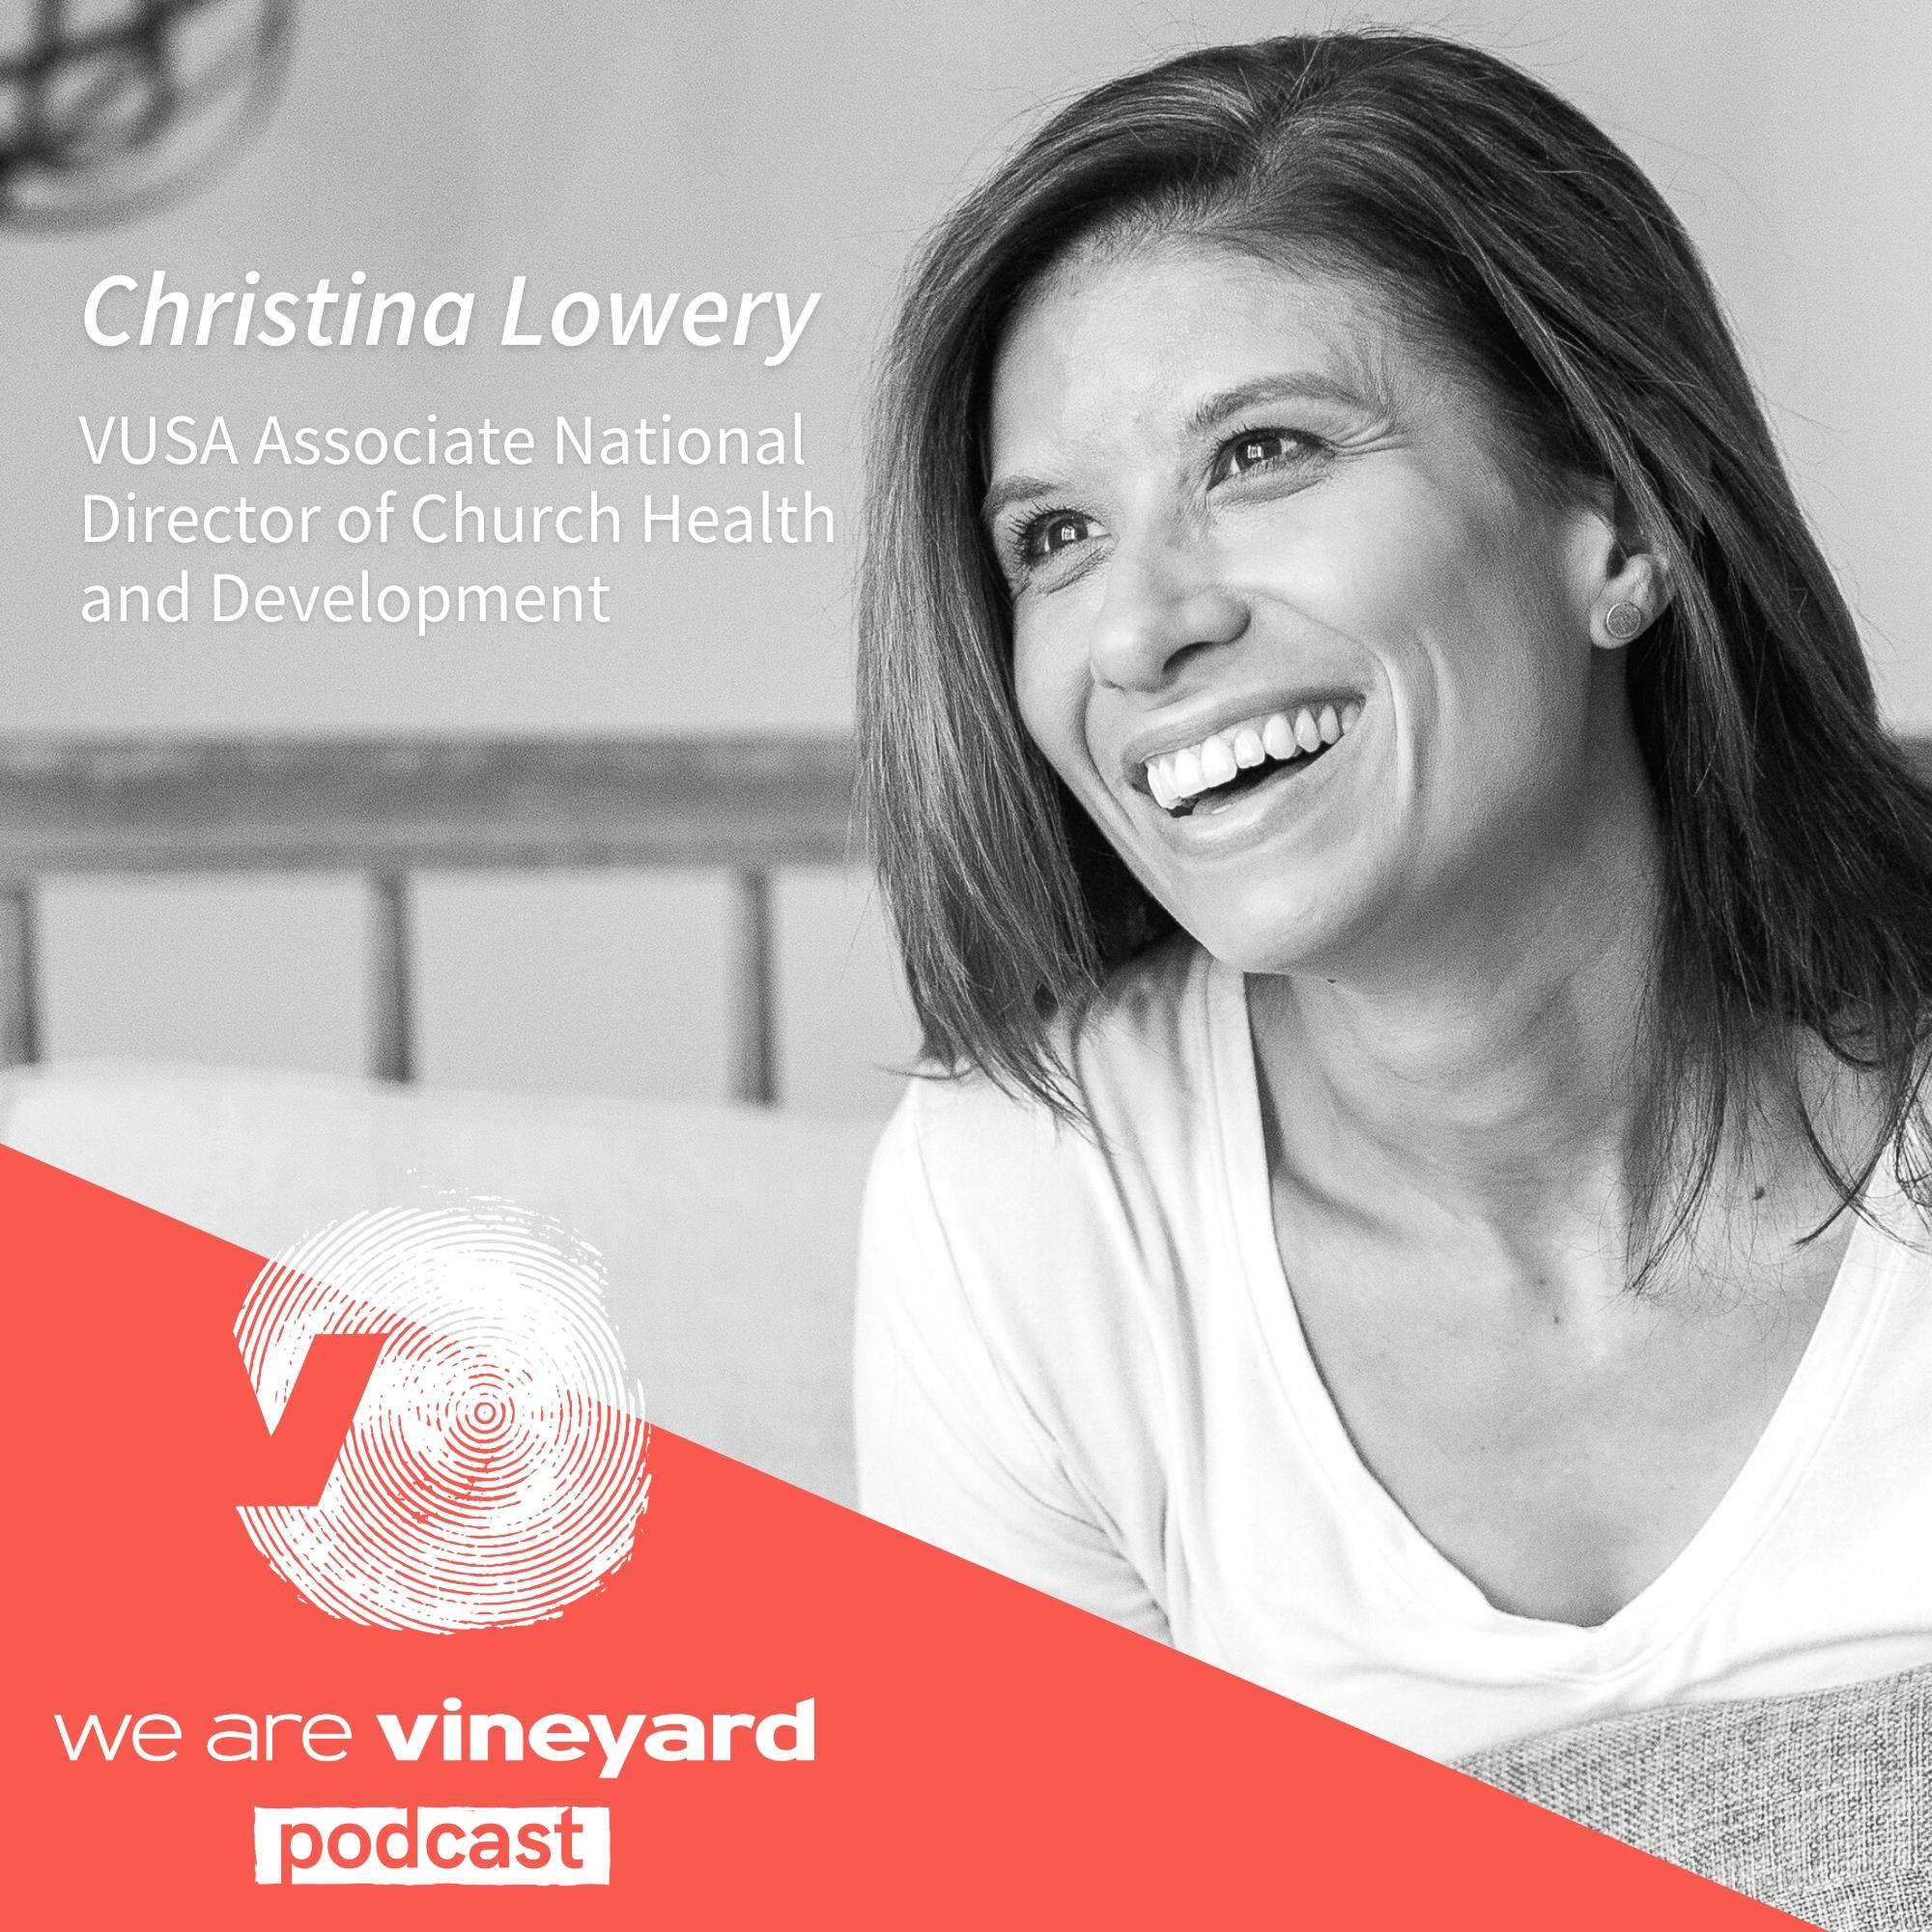 Christina Lowery: Soft Hearts, Tough Skin, and Holding People With Open Hands